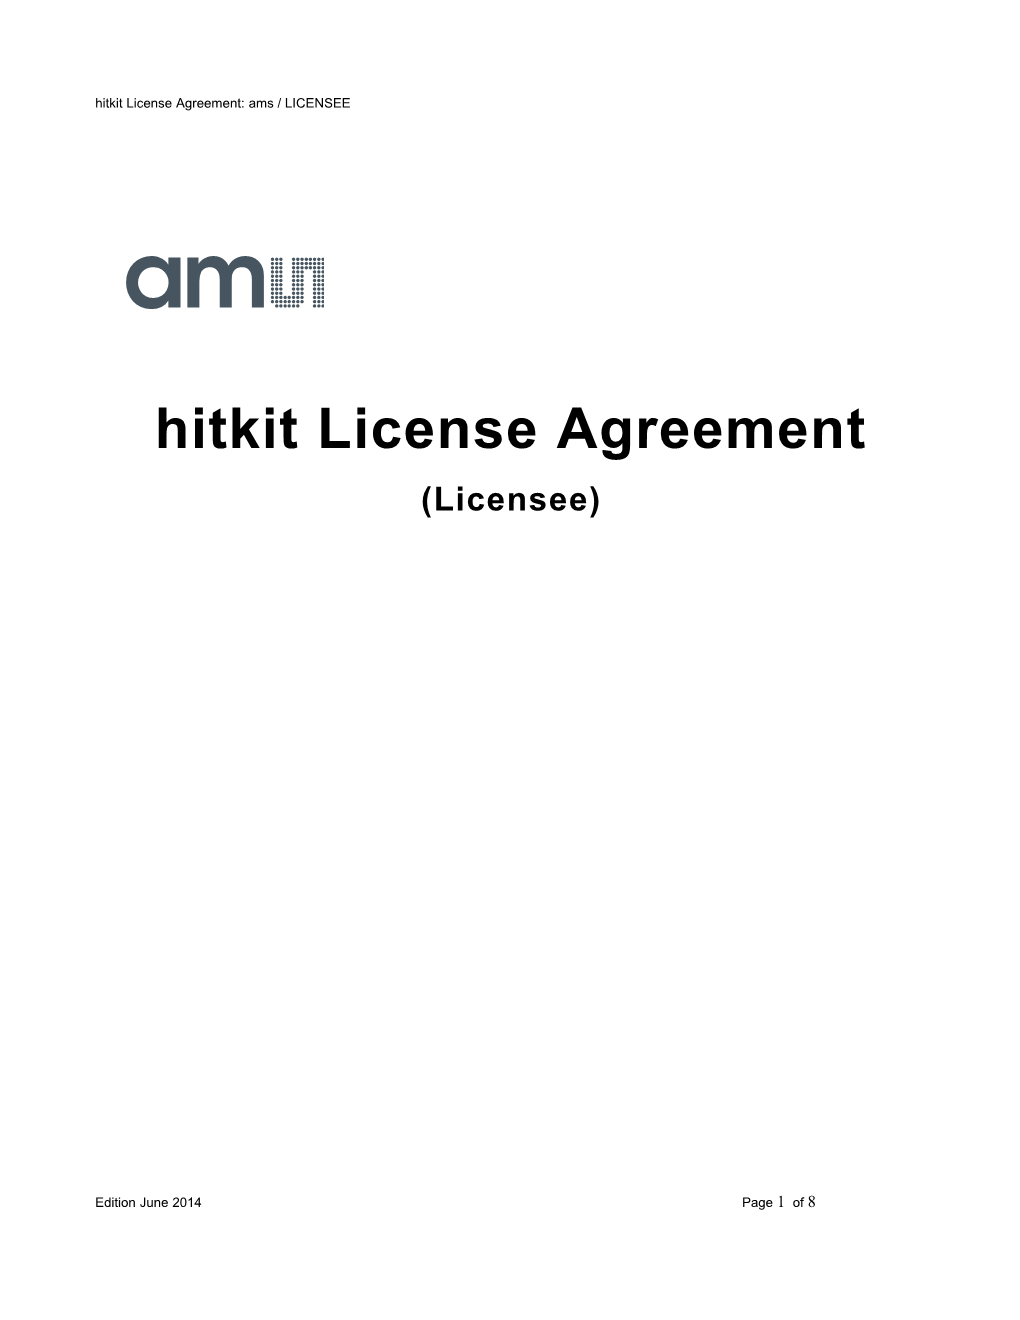 Hitkit License Agreement June 2014